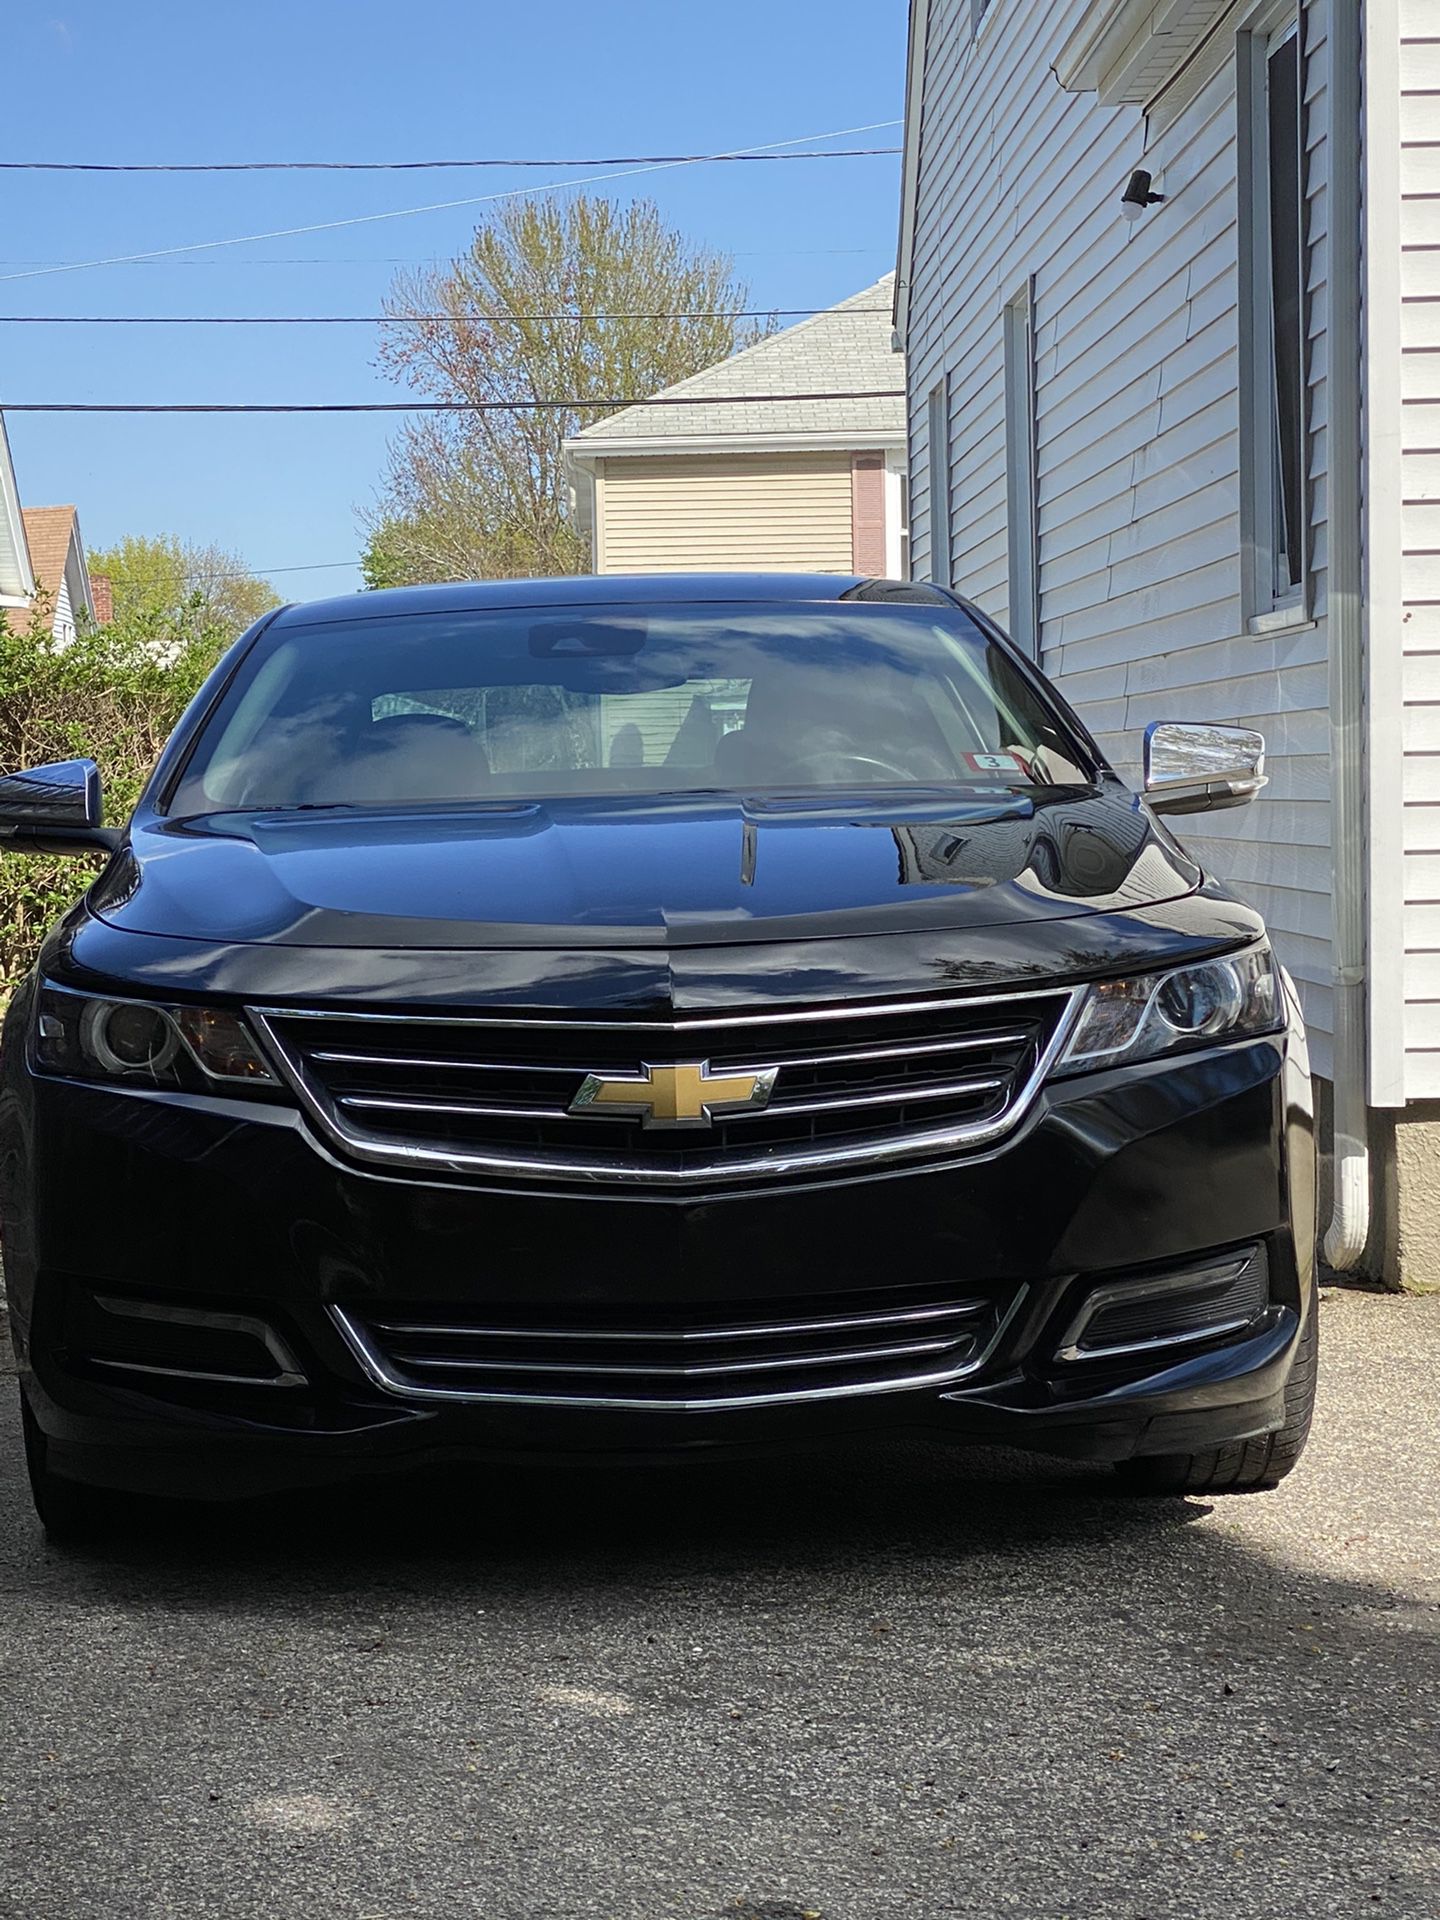 Chevy impala Ltz fully loaded great condition black on black heated everything backup camera navigation onstar blue tooth road side assistant don’t m